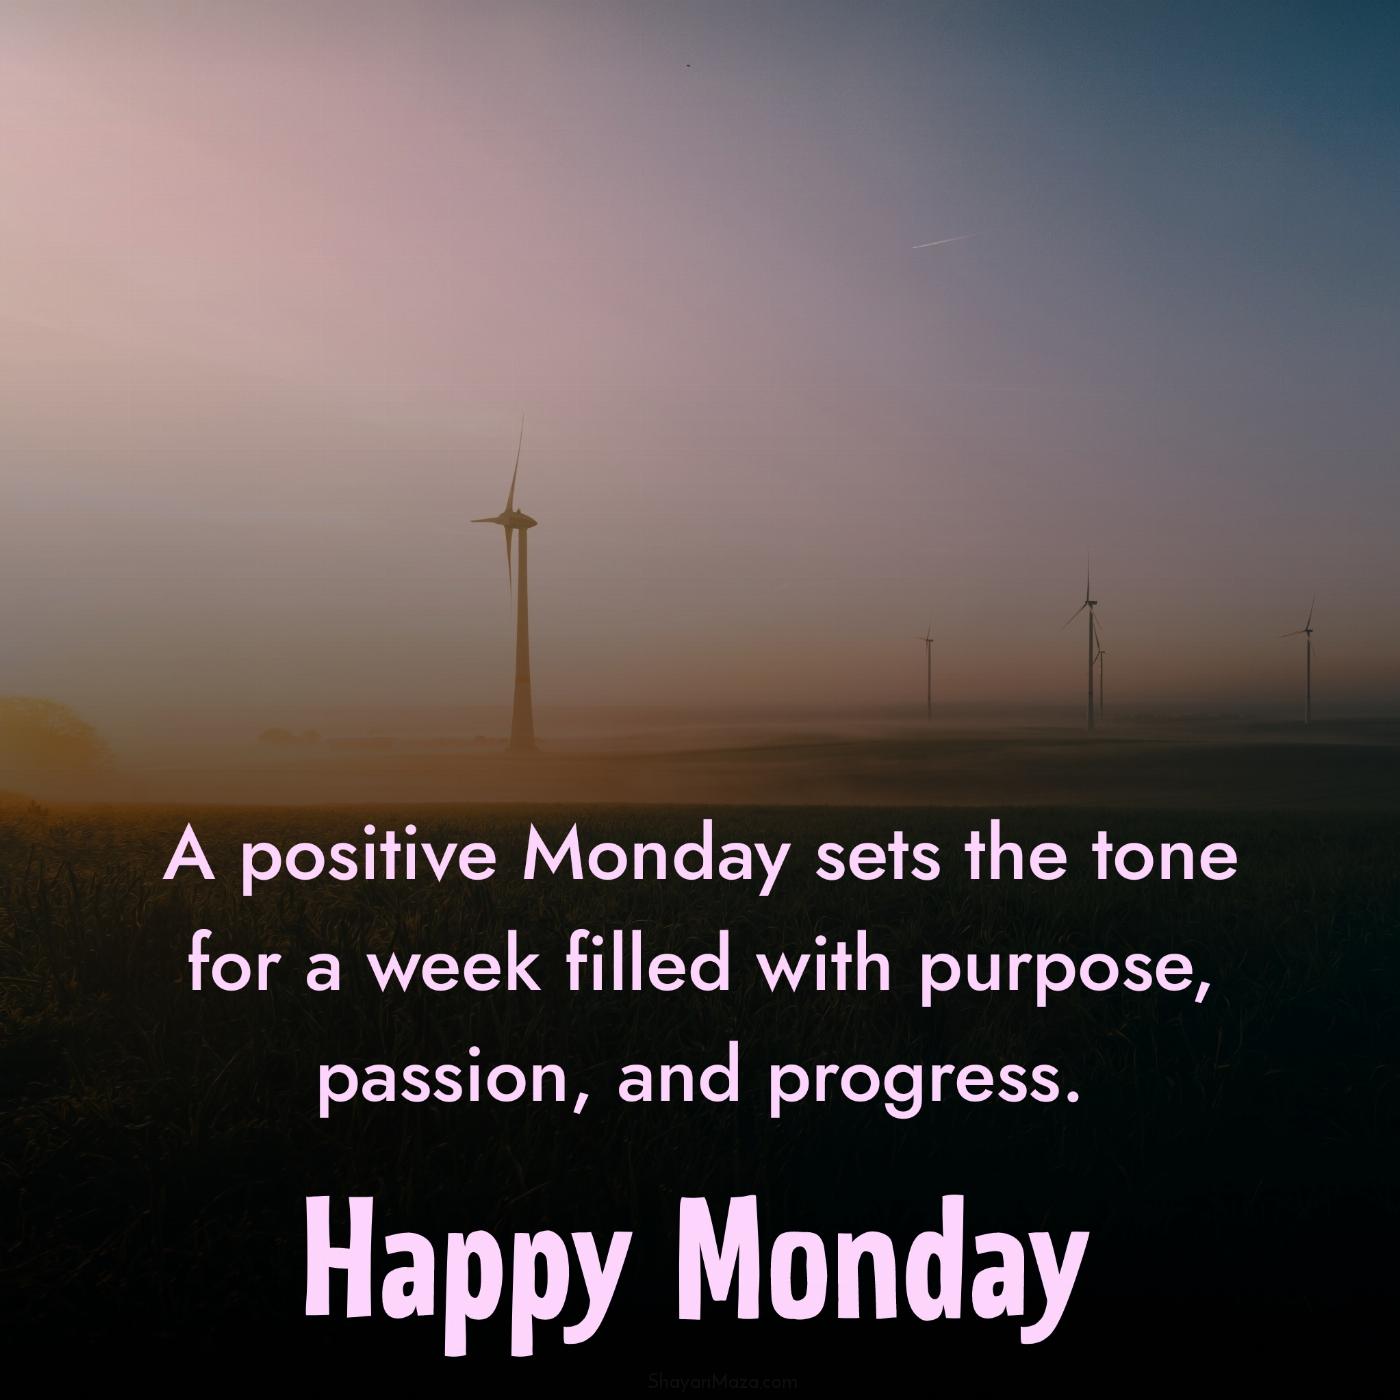 A positive Monday sets the tone for a week